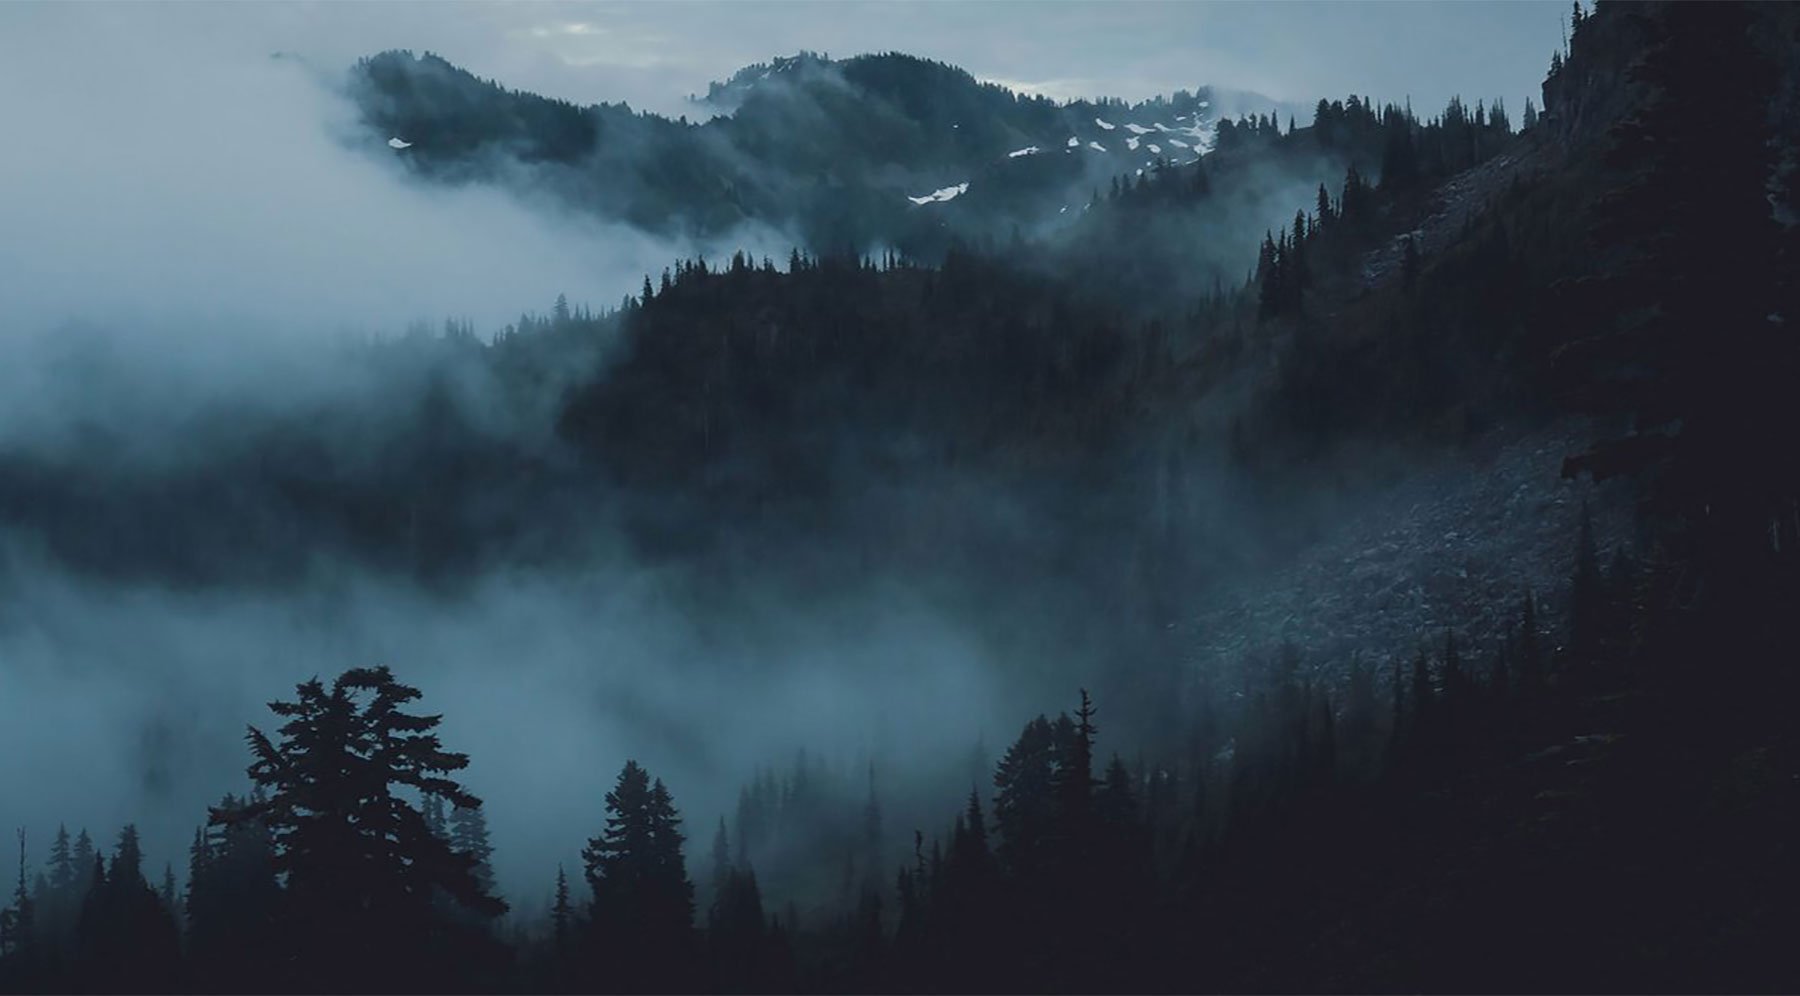 Capturing The Wild Pacific Northwest: Pine And Fir Candle